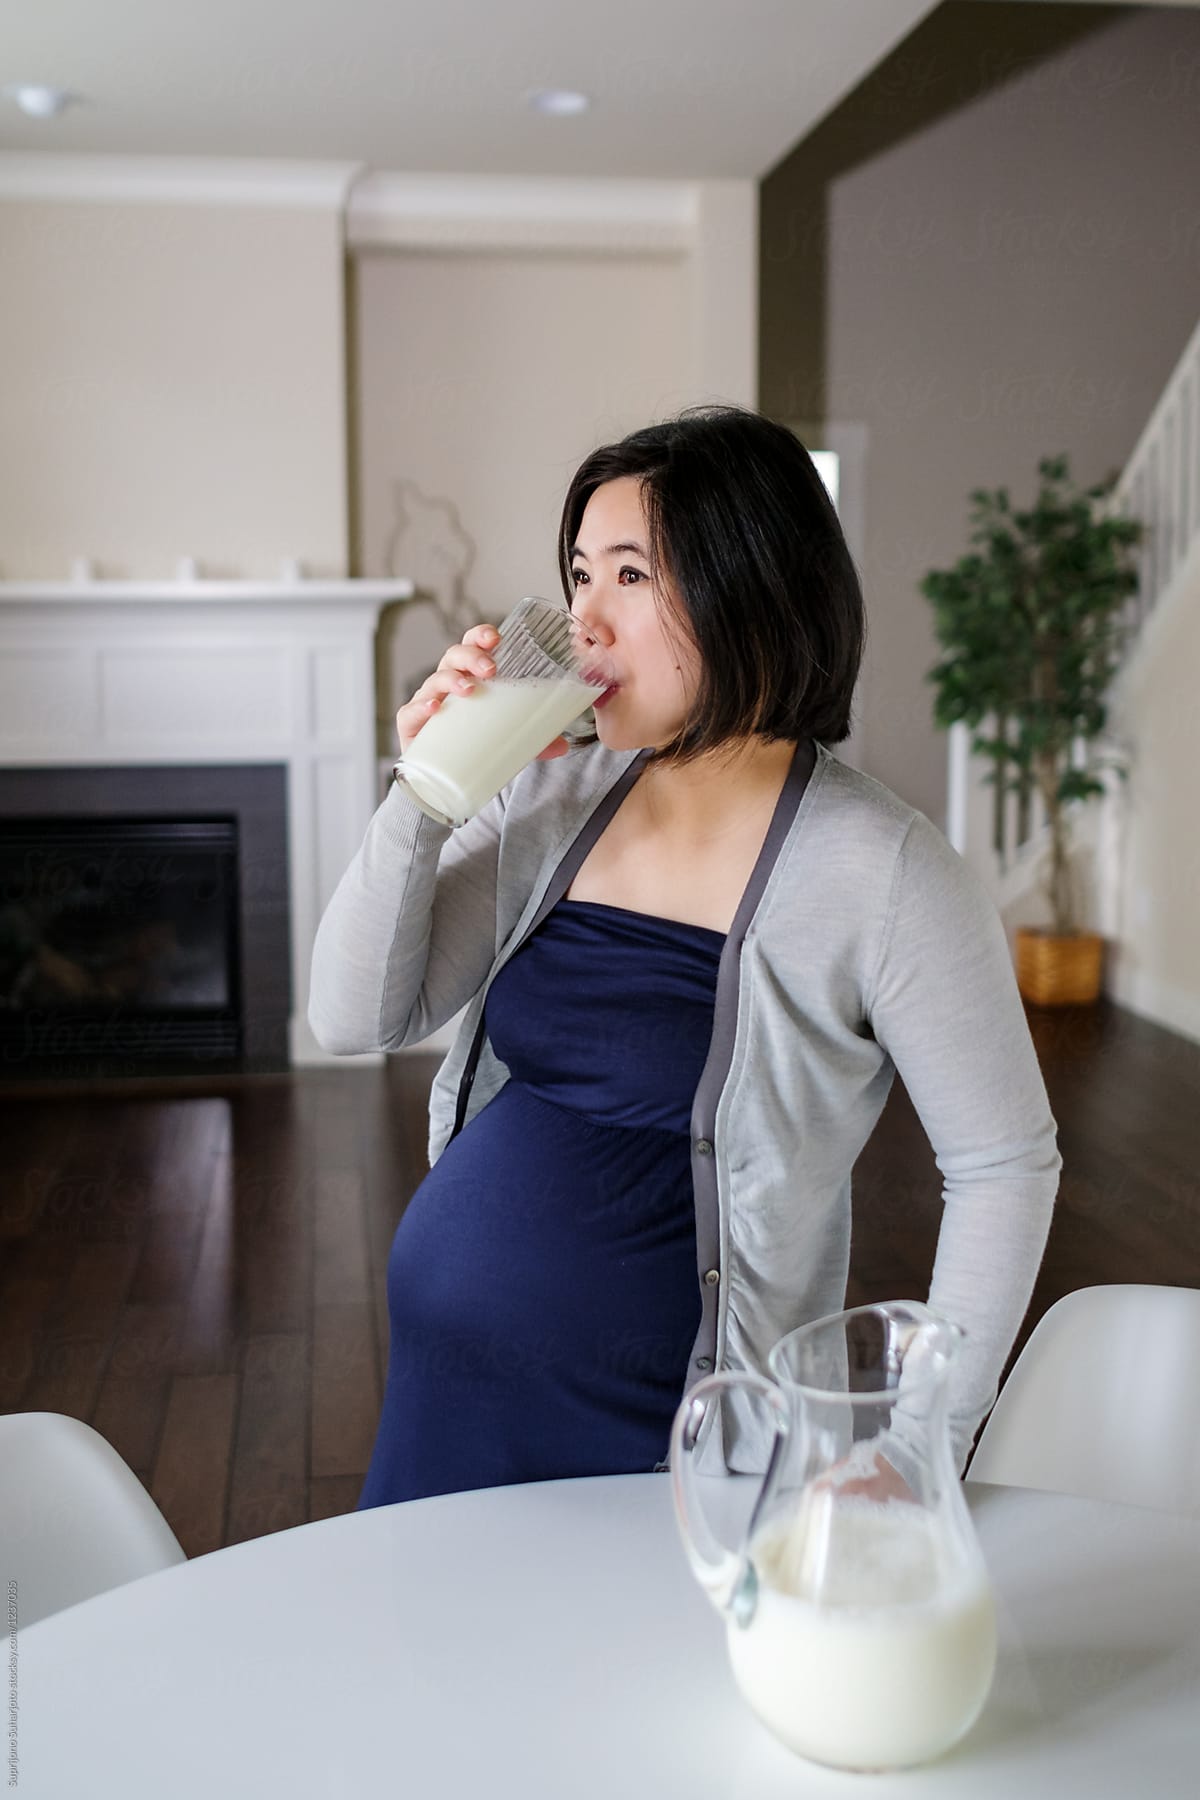 Pregnant Asian Woman Drinking Milk At Home By Take A Pix Media 4268